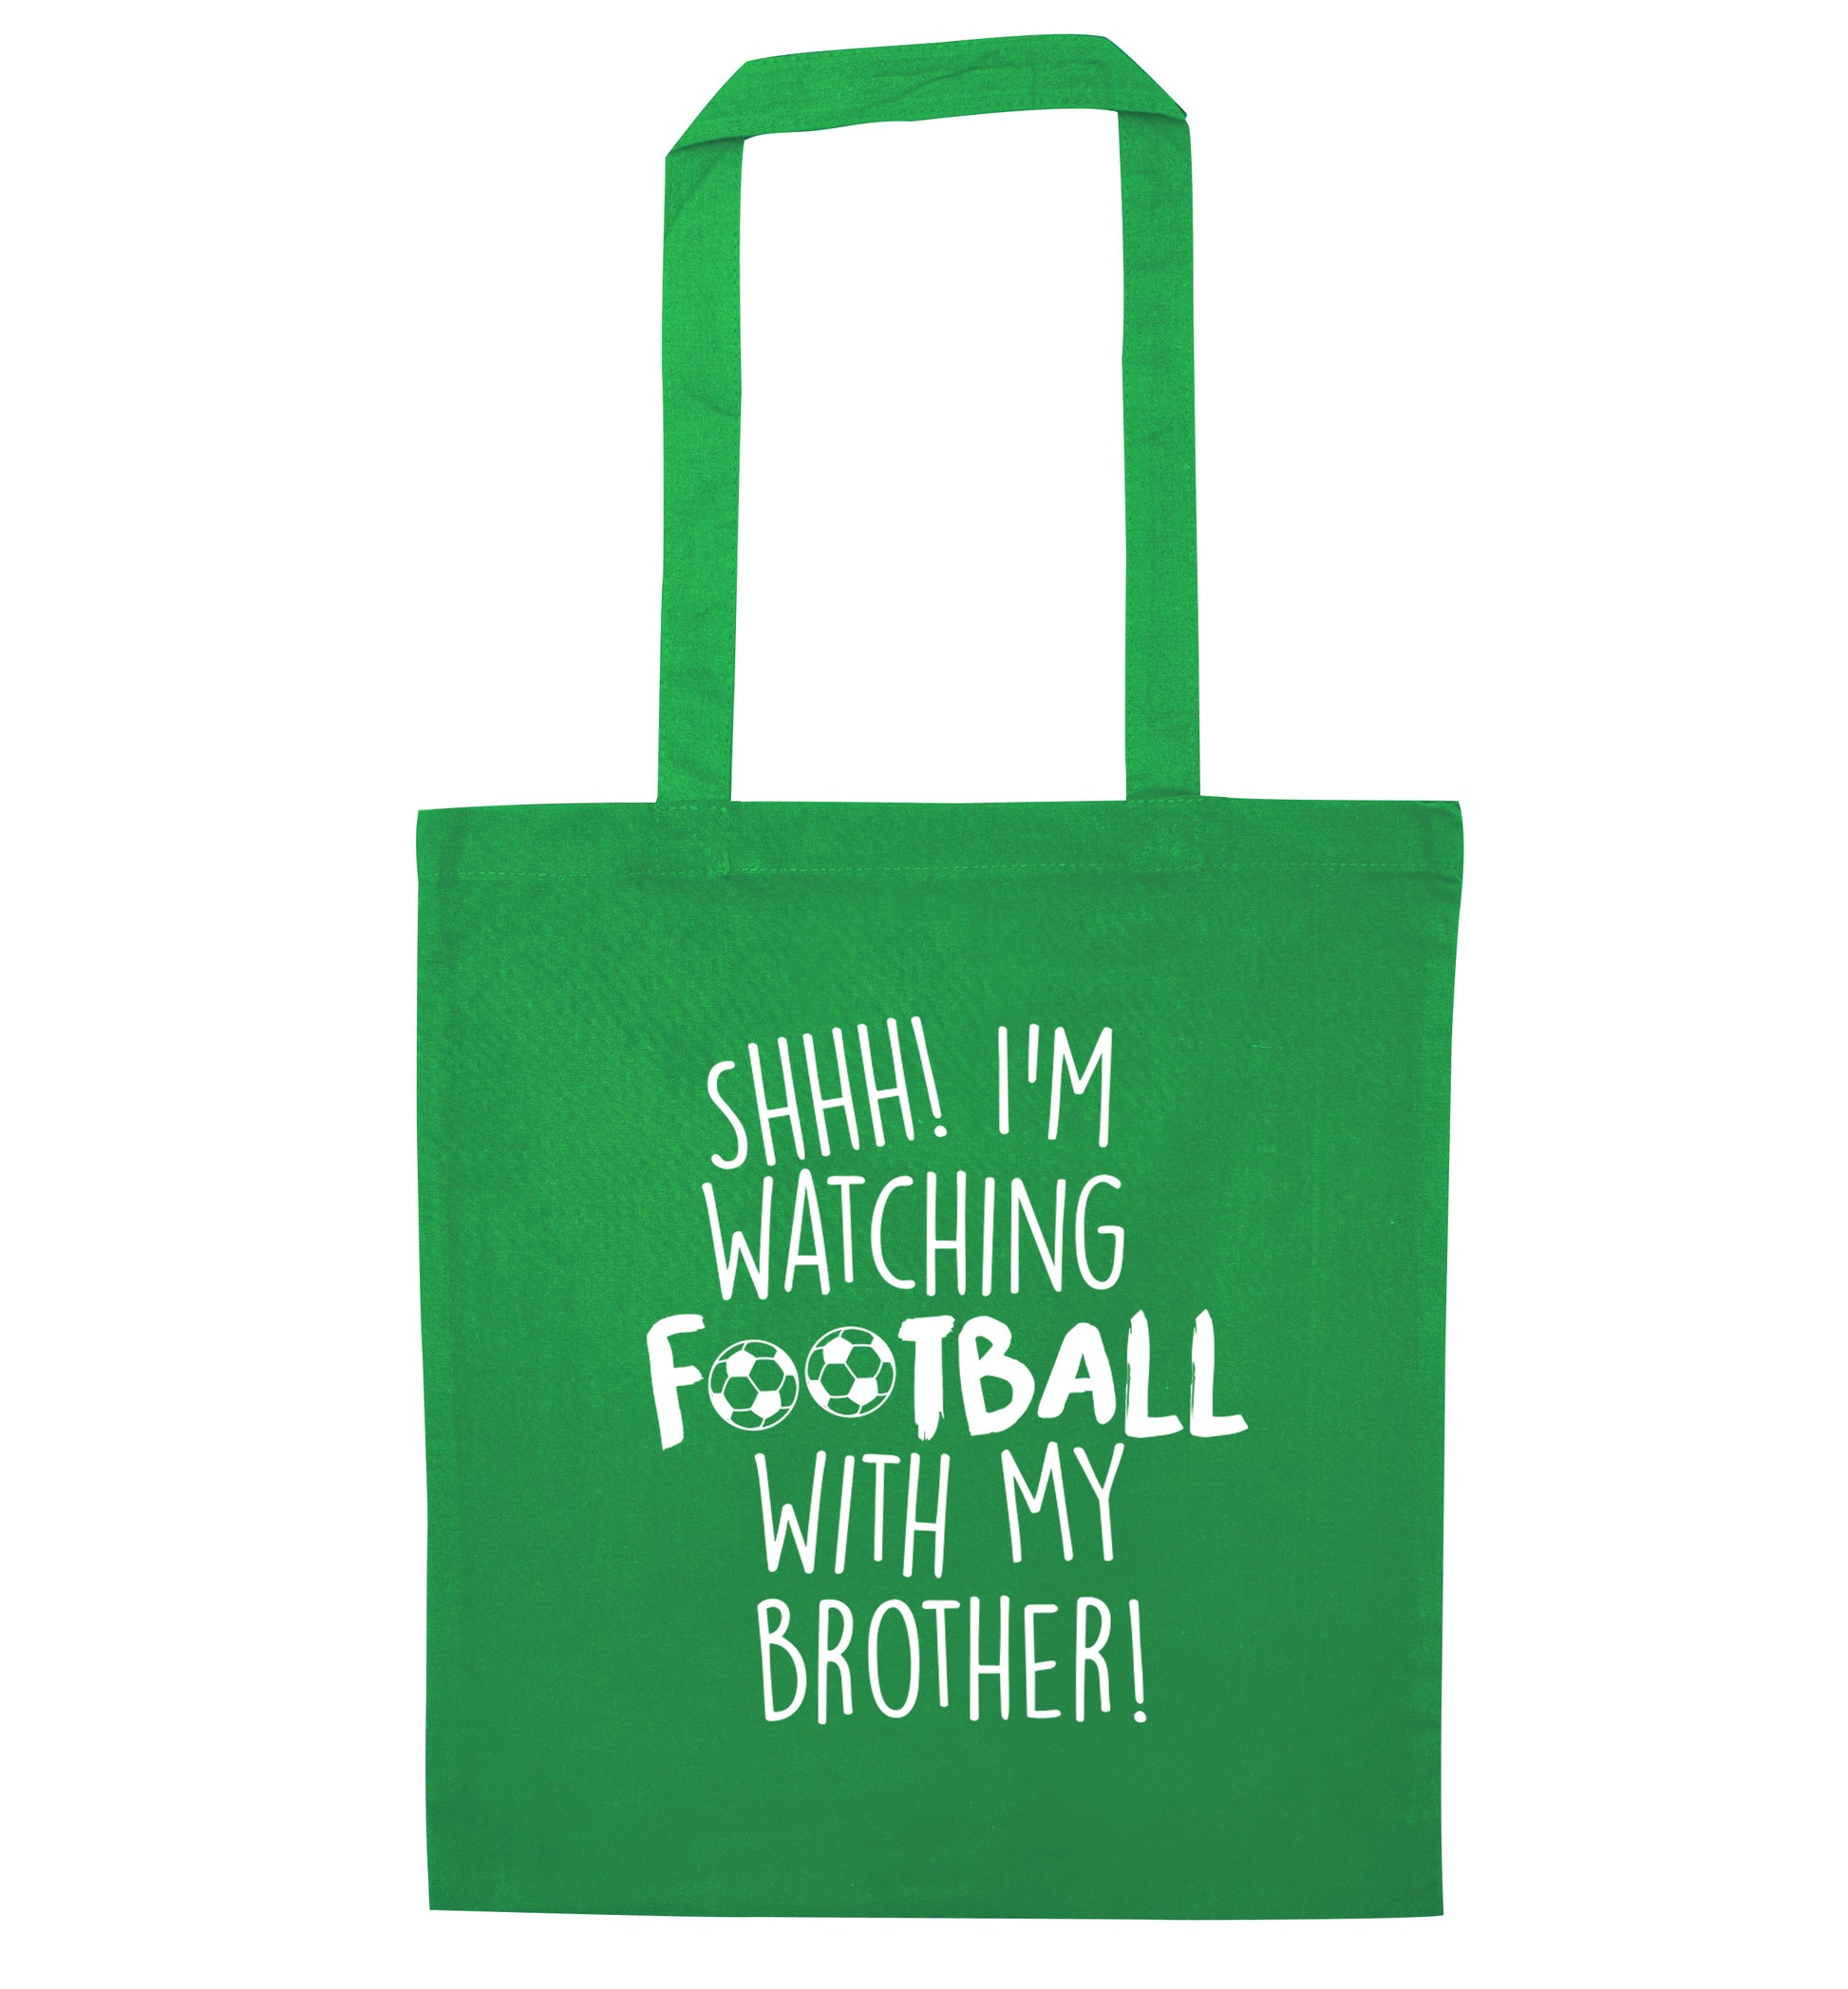 Shhh I'm watching football with my brother green tote bag